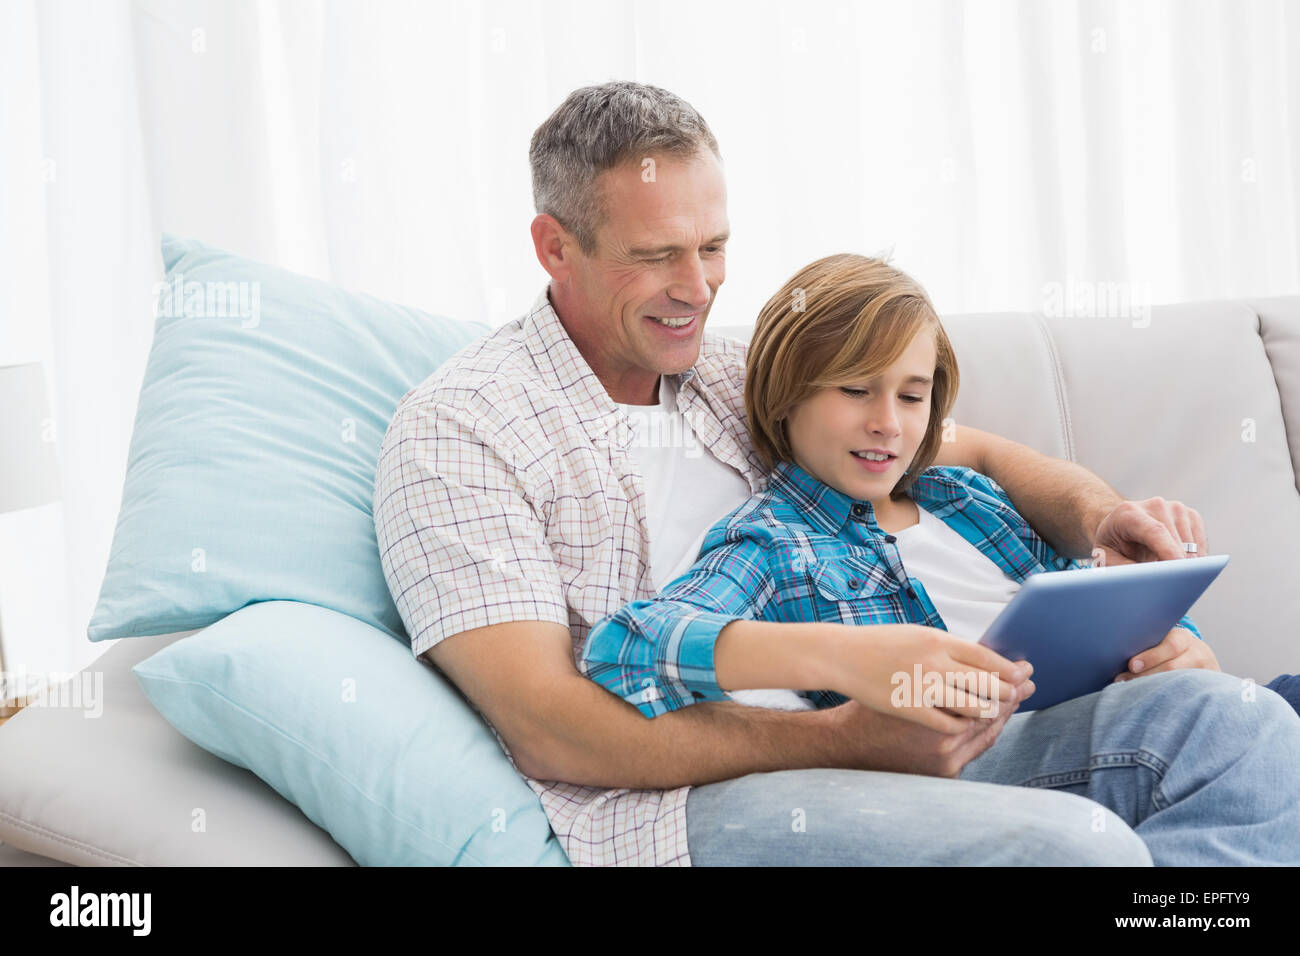 Father with son relaxing on the couch using laptop Stock Photo